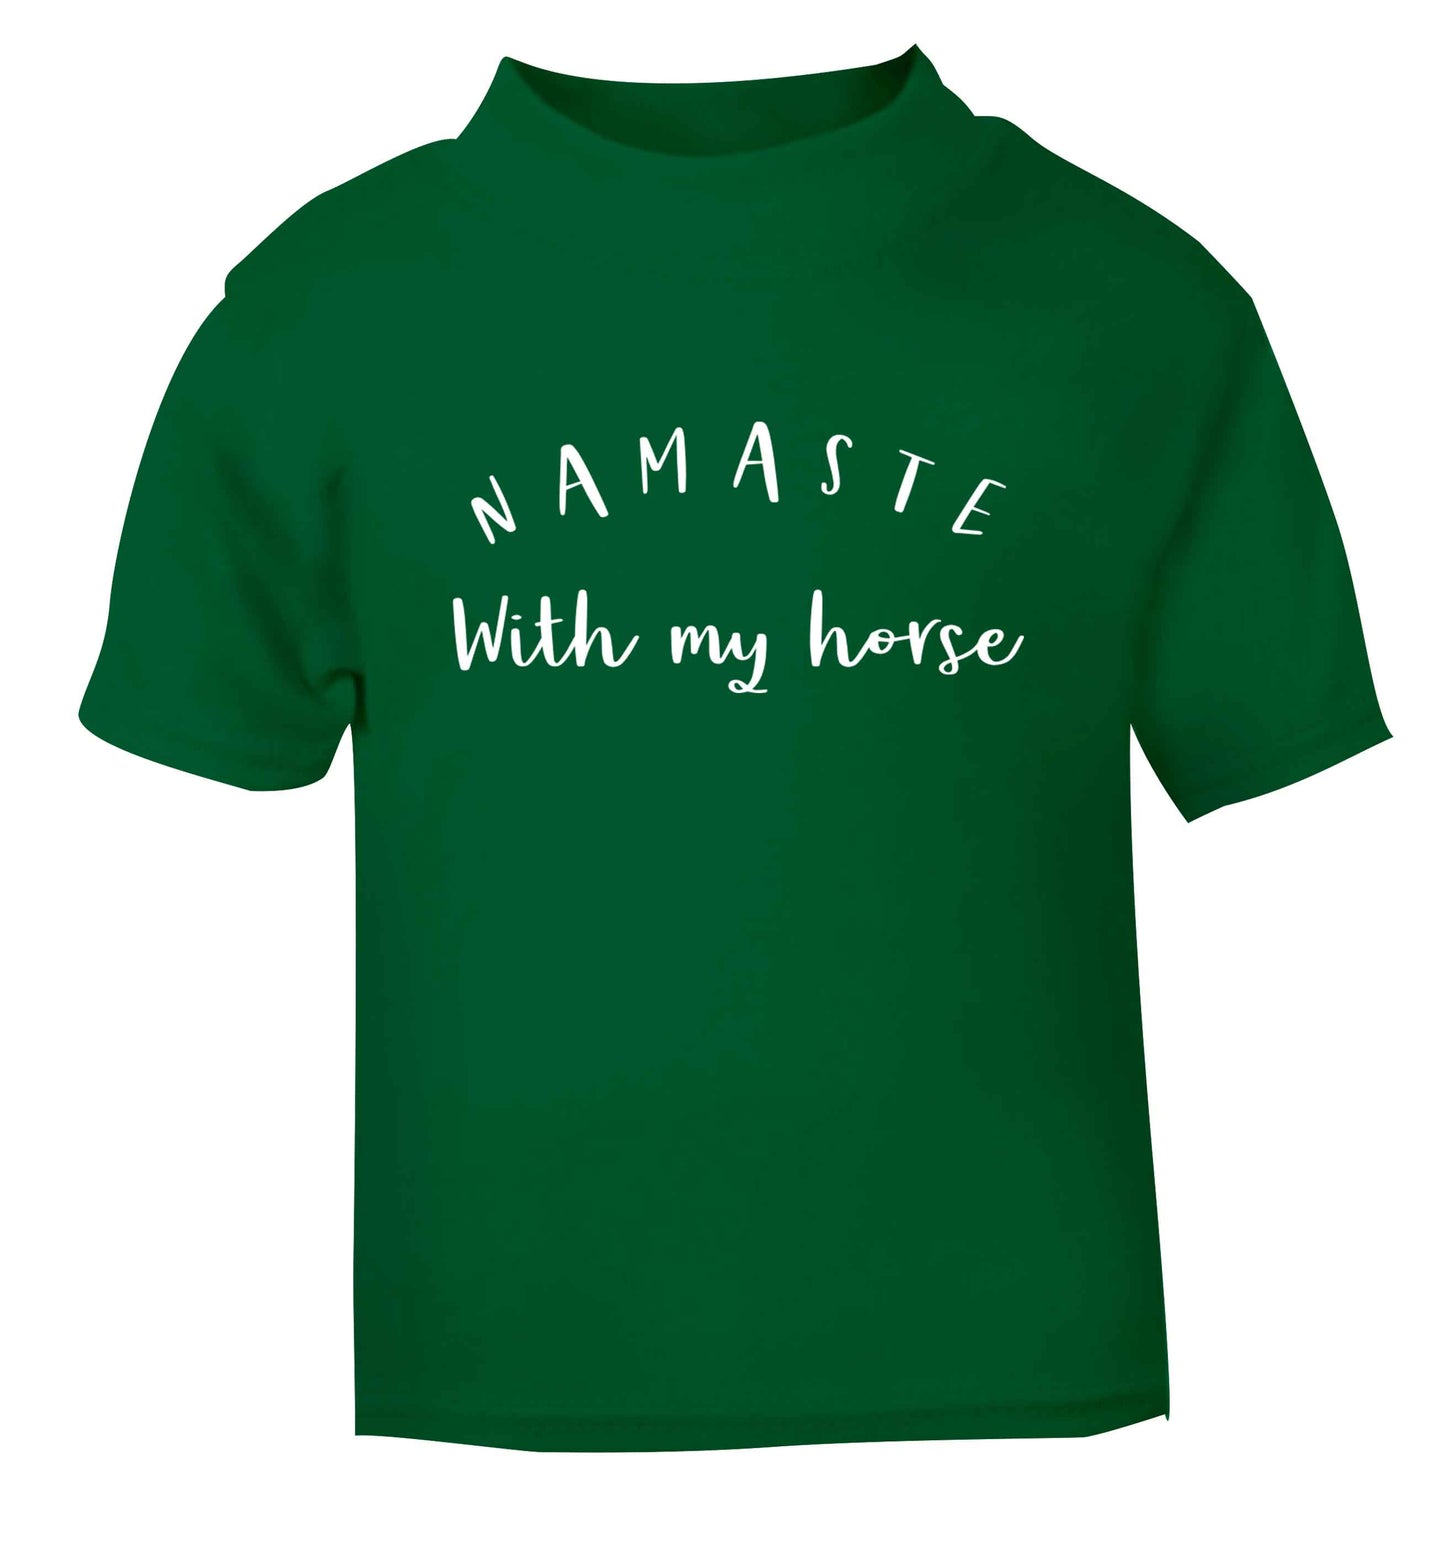 Namaste with my horse green baby toddler Tshirt 2 Years